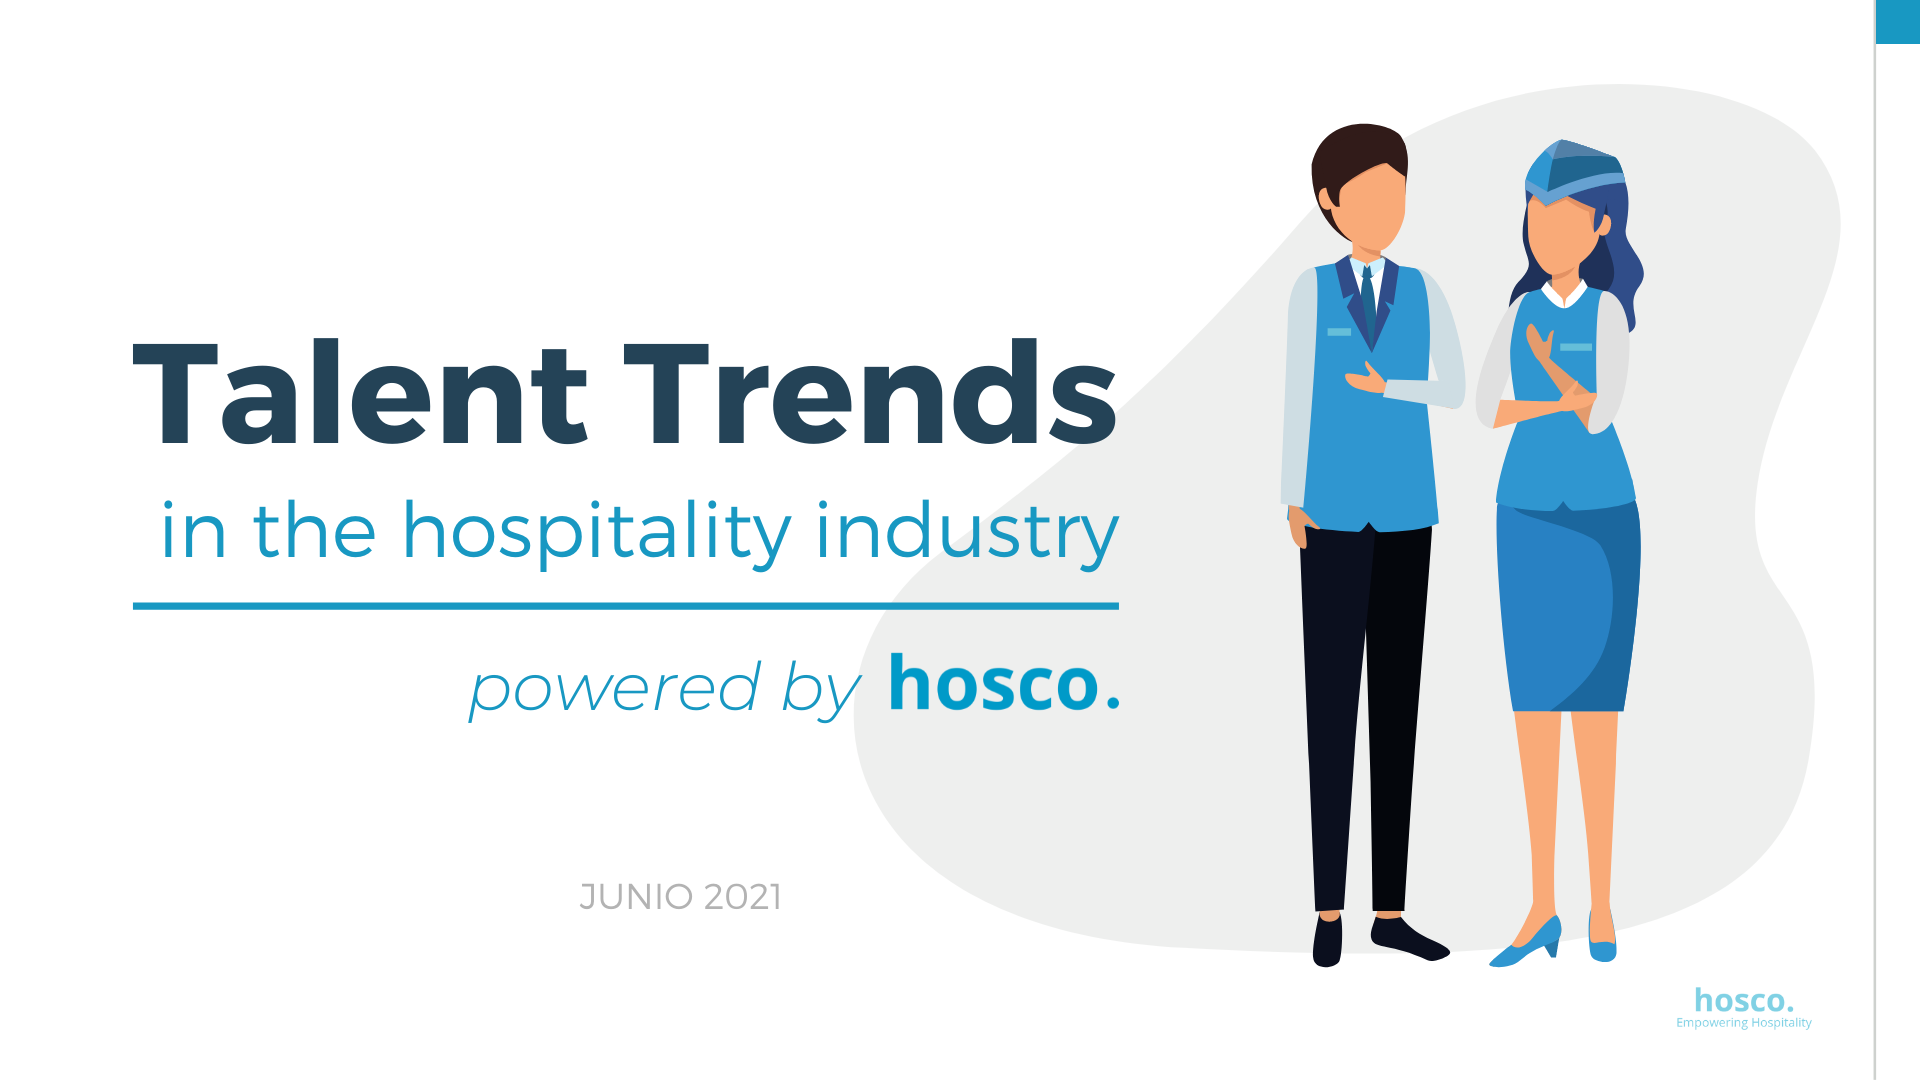 Talent Trends in the Hospitality Industry. ¡Conoce a tu gente!